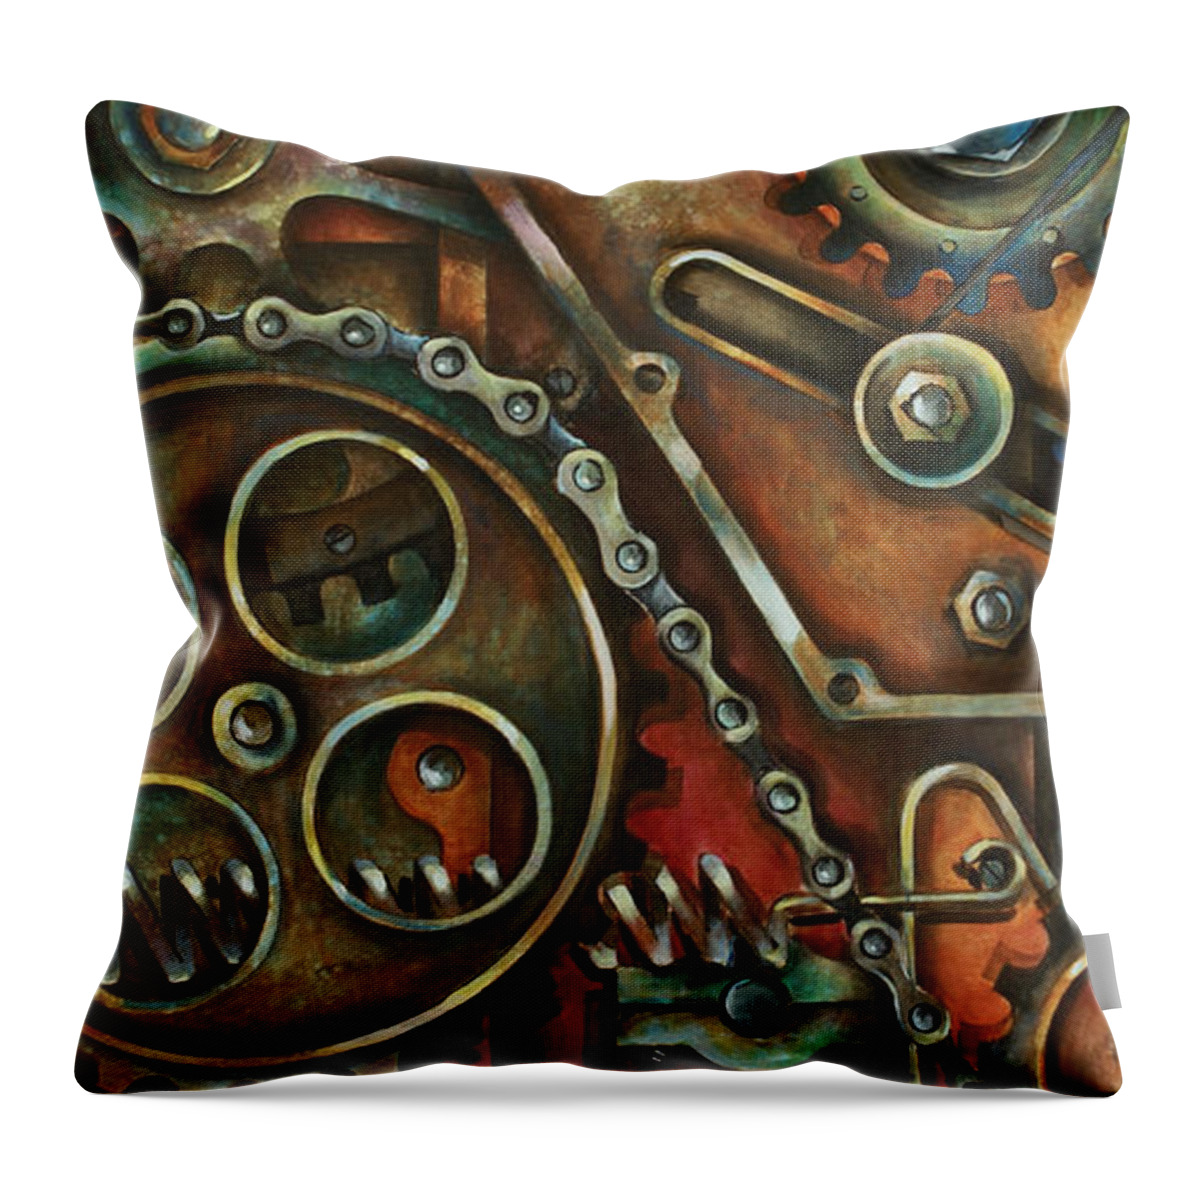 Mechanical Painting Throw Pillow featuring the painting Harmony by Michael Lang